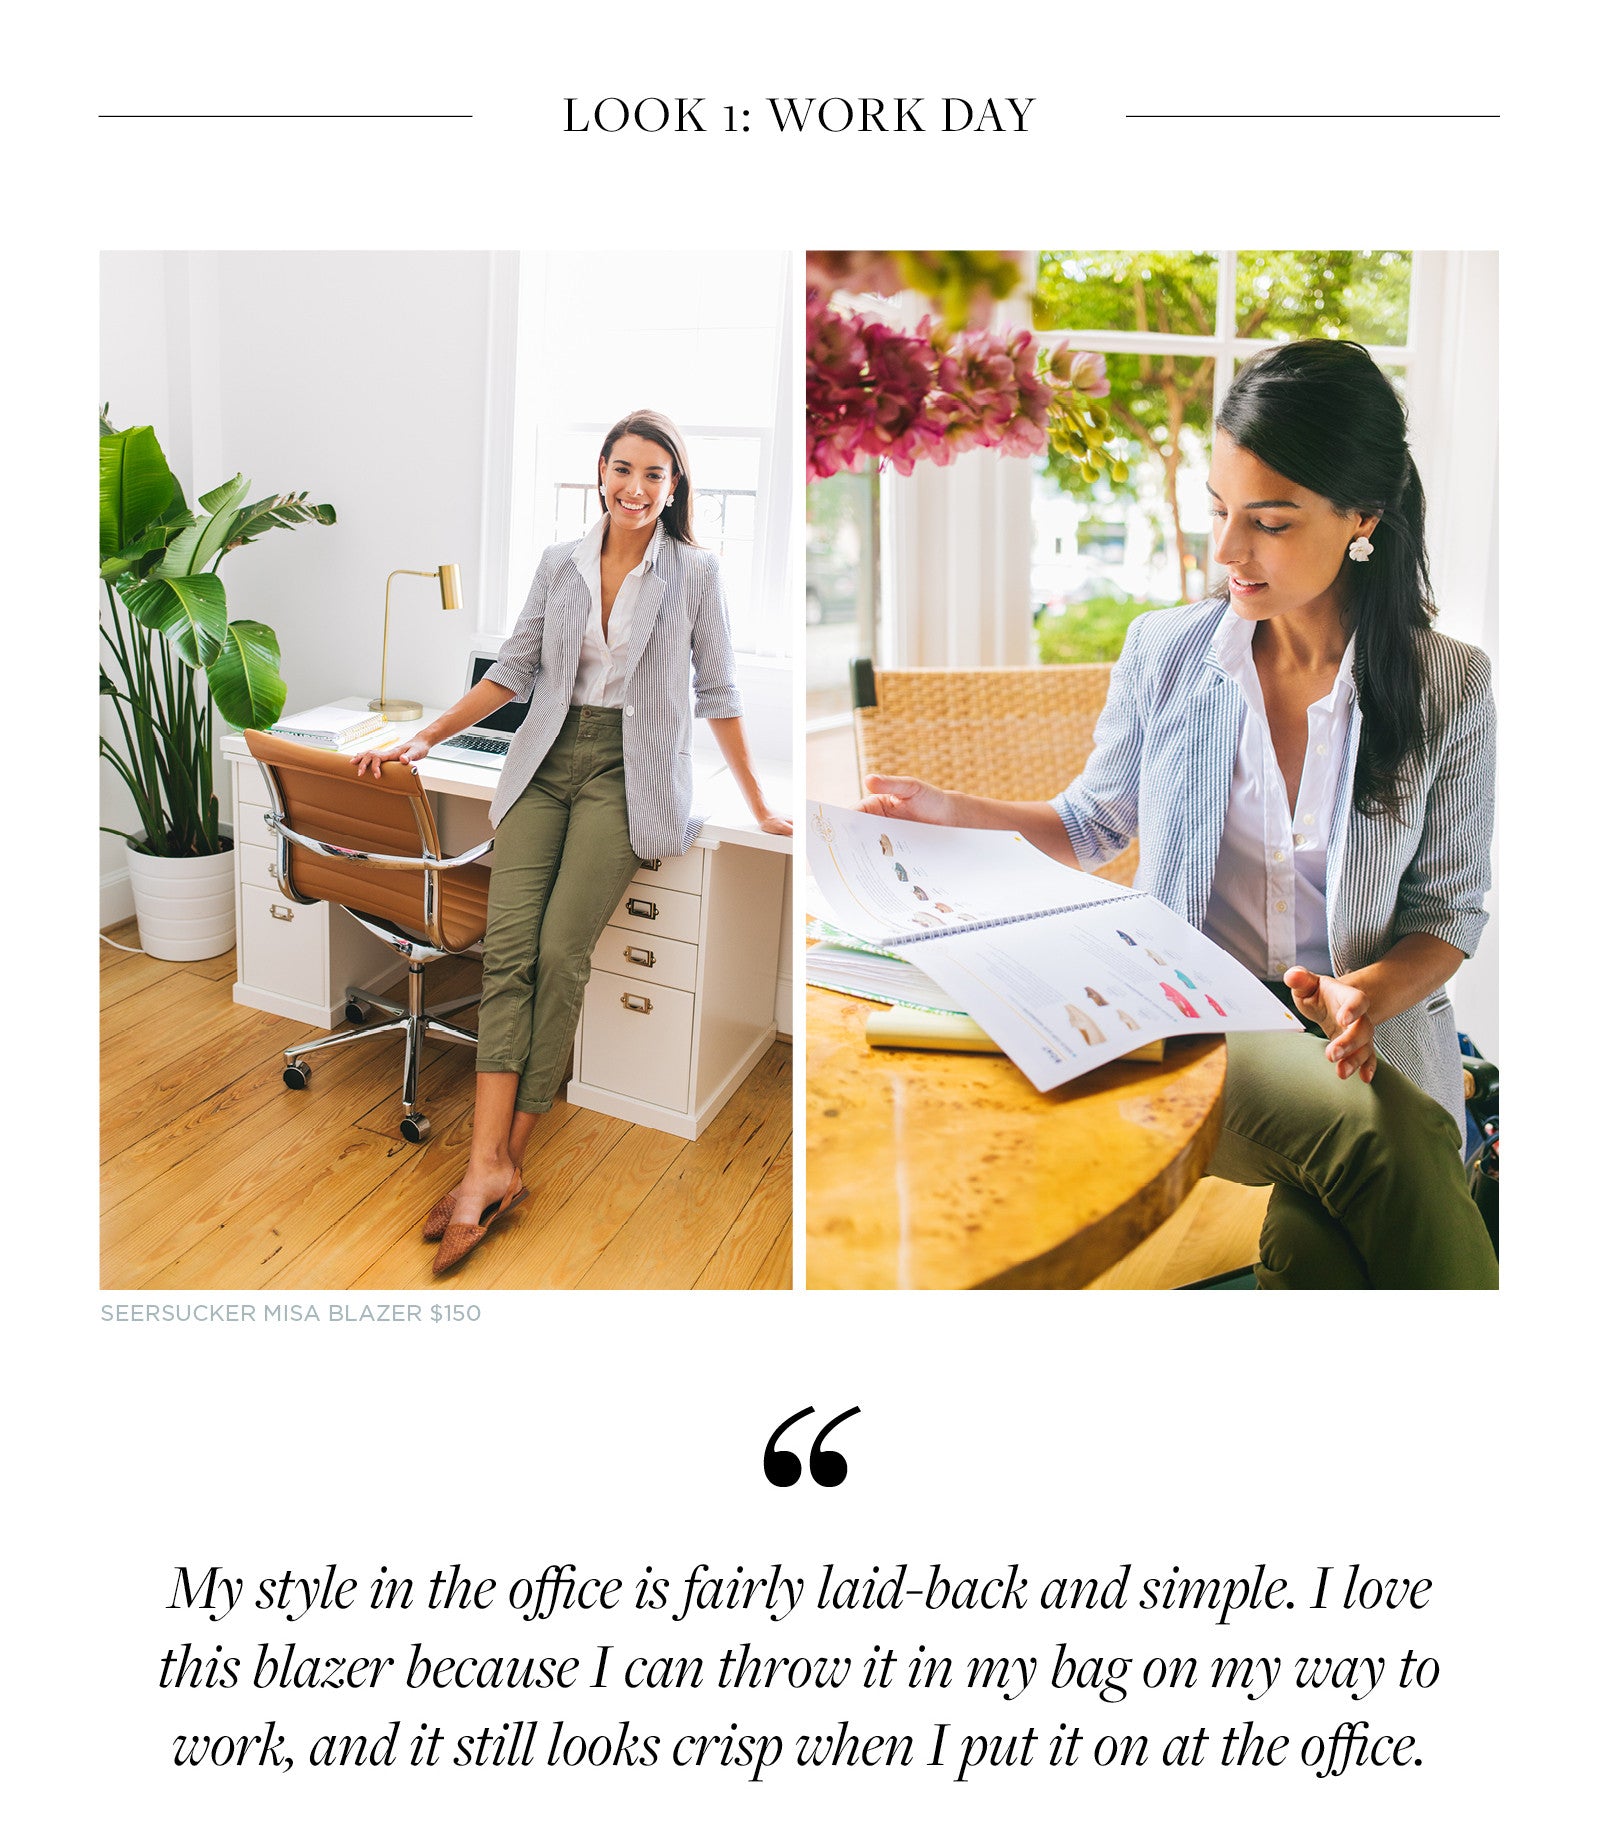 My style in the office is fairly laid-back and simple. I love this blazer because I can throw it in my bag on my way to work, and it still looks crisp when I put it on at the office.  